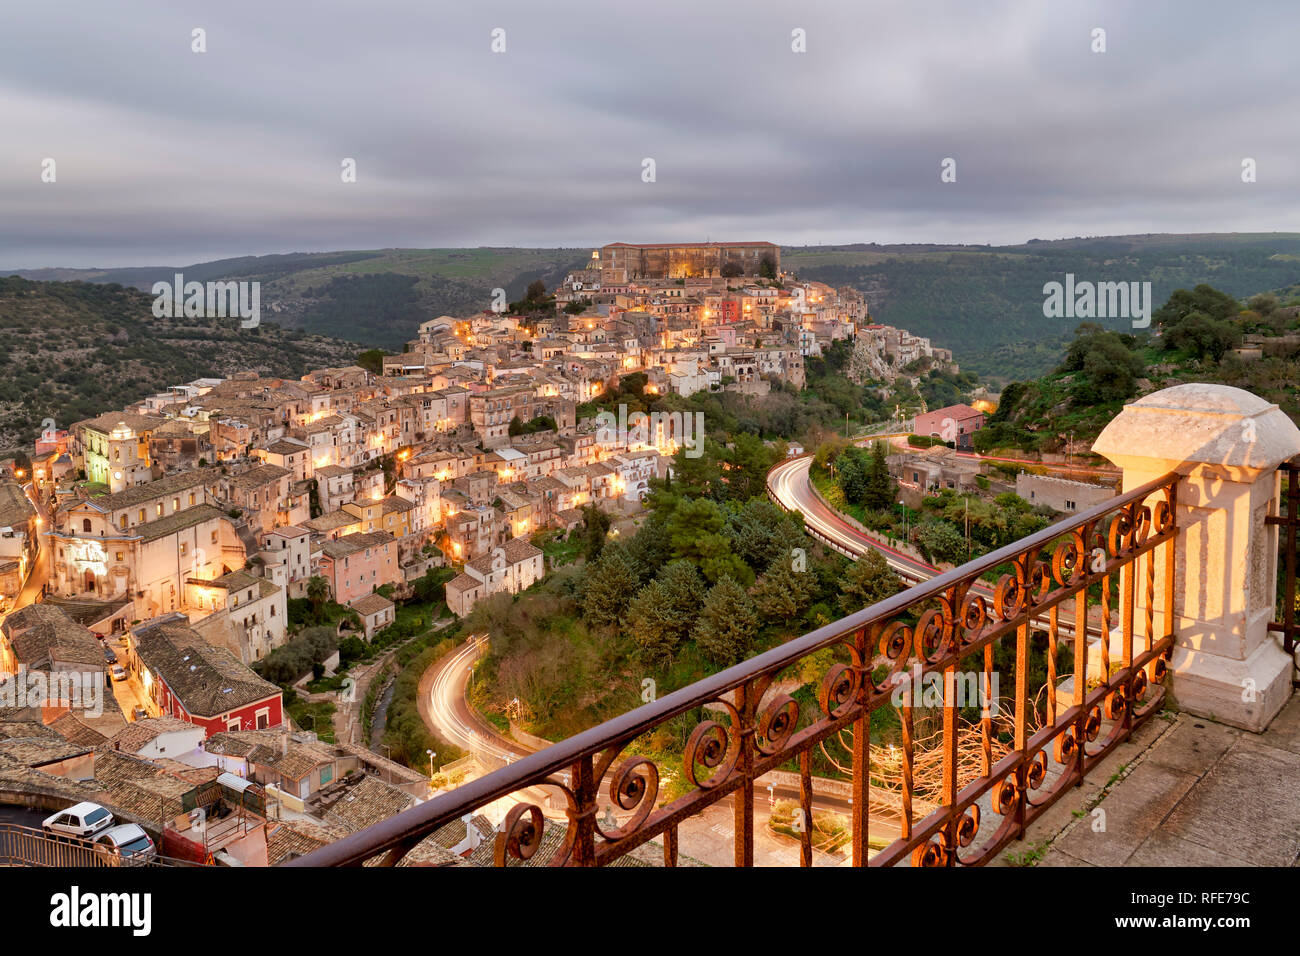 Panorama View Of Ragusa Ibla Old Town At Sunset Sicily Italy Stock Photo Alamy